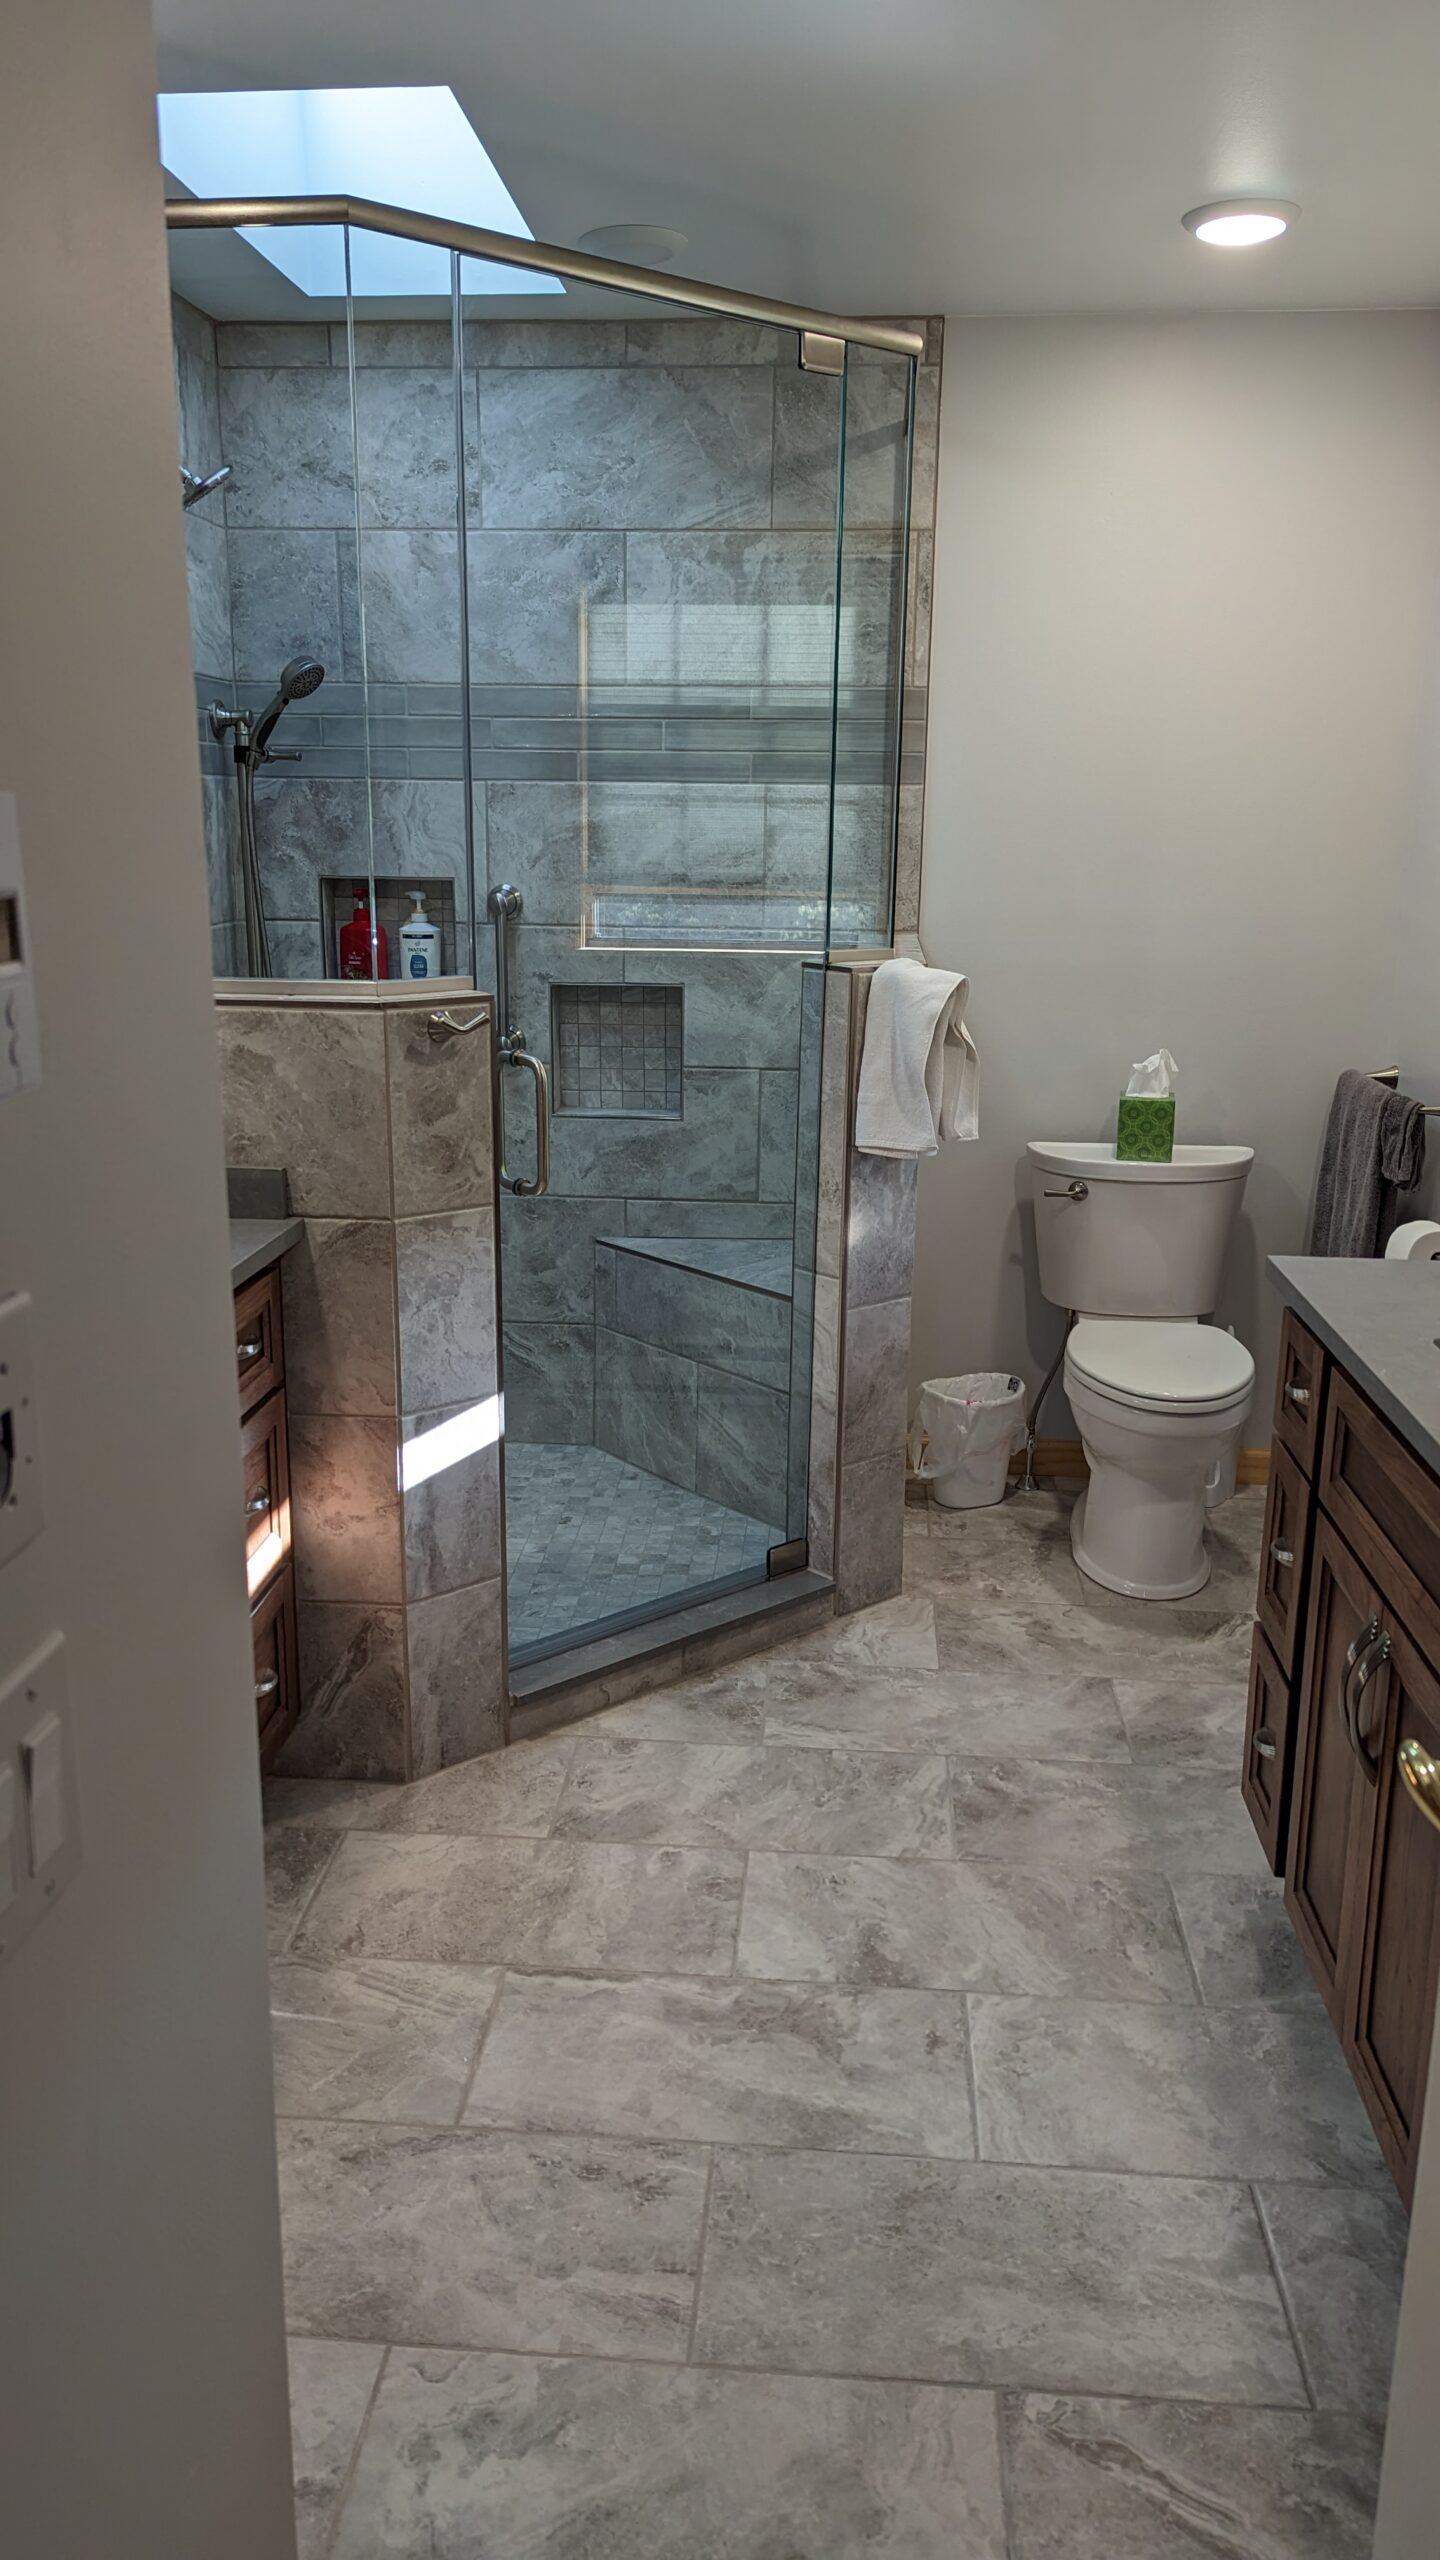 Picture of the shower area after the renovation.